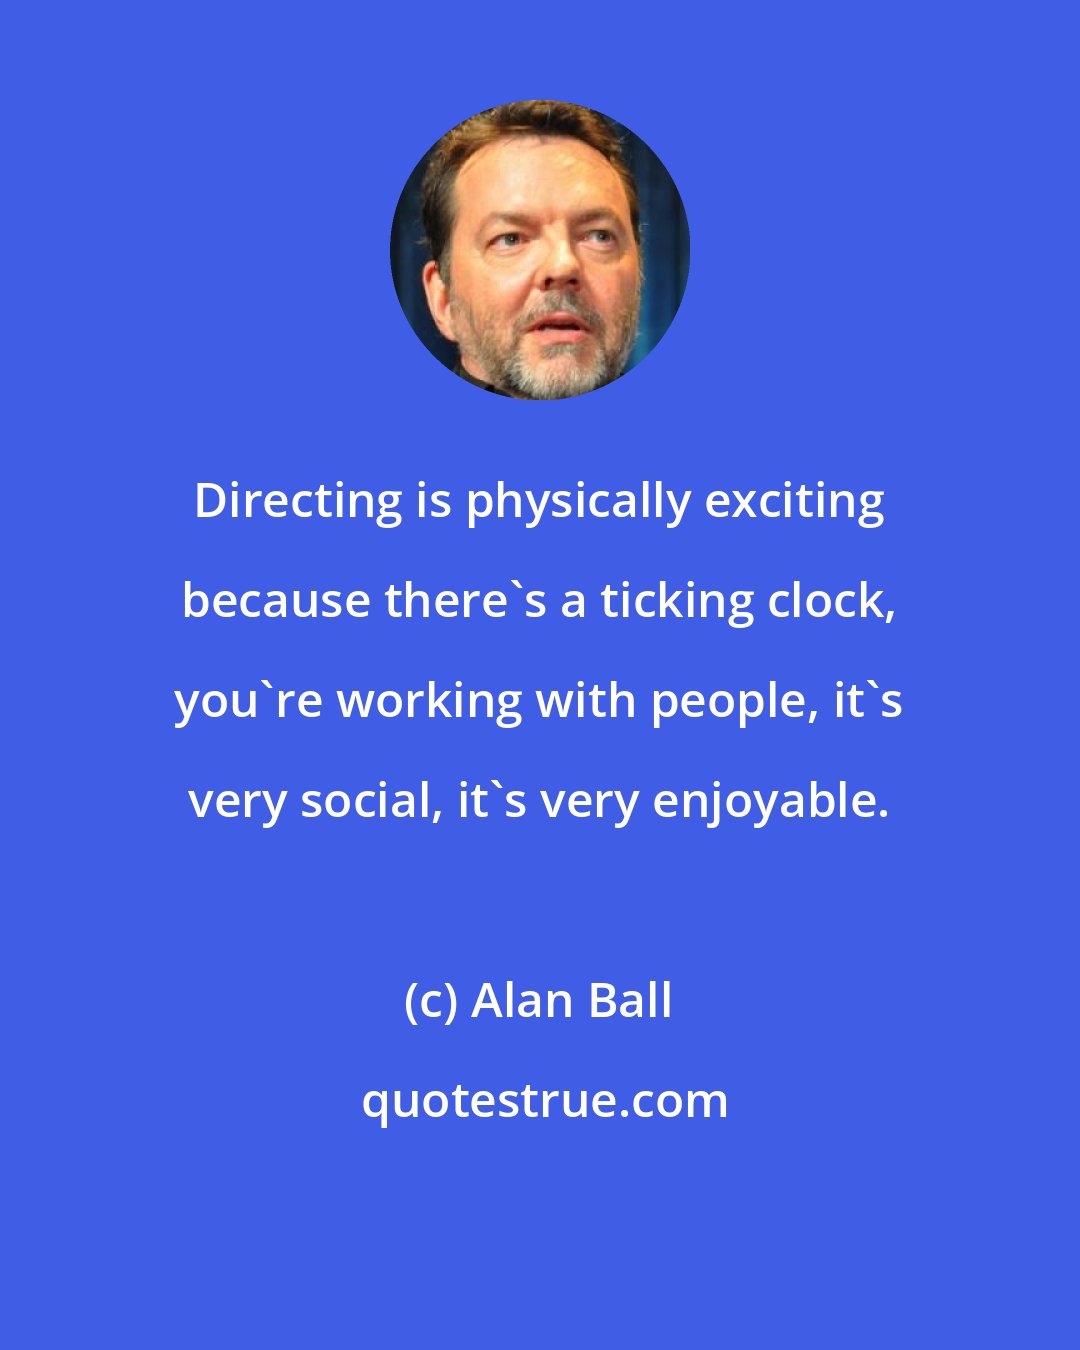 Alan Ball: Directing is physically exciting because there's a ticking clock, you're working with people, it's very social, it's very enjoyable.